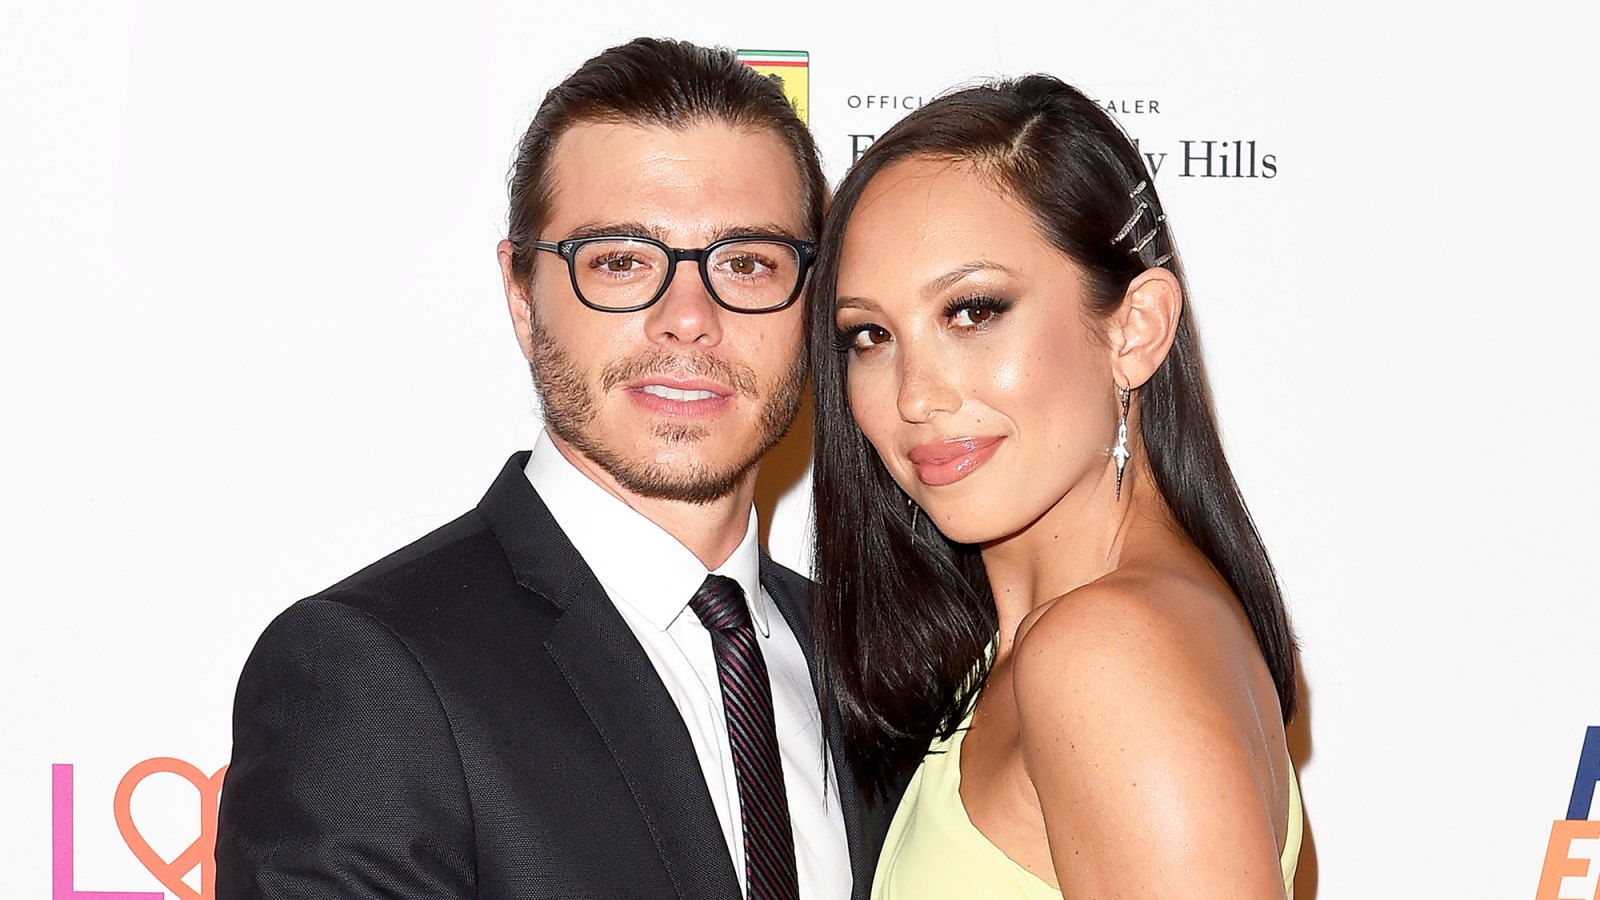 Matthew Lawrence and Cheryl Burke arrive at the 25th Annual Race to Erase MS Gala at The Beverly Hilton Hotel on April 20, 2018 in Beverly Hills, California.